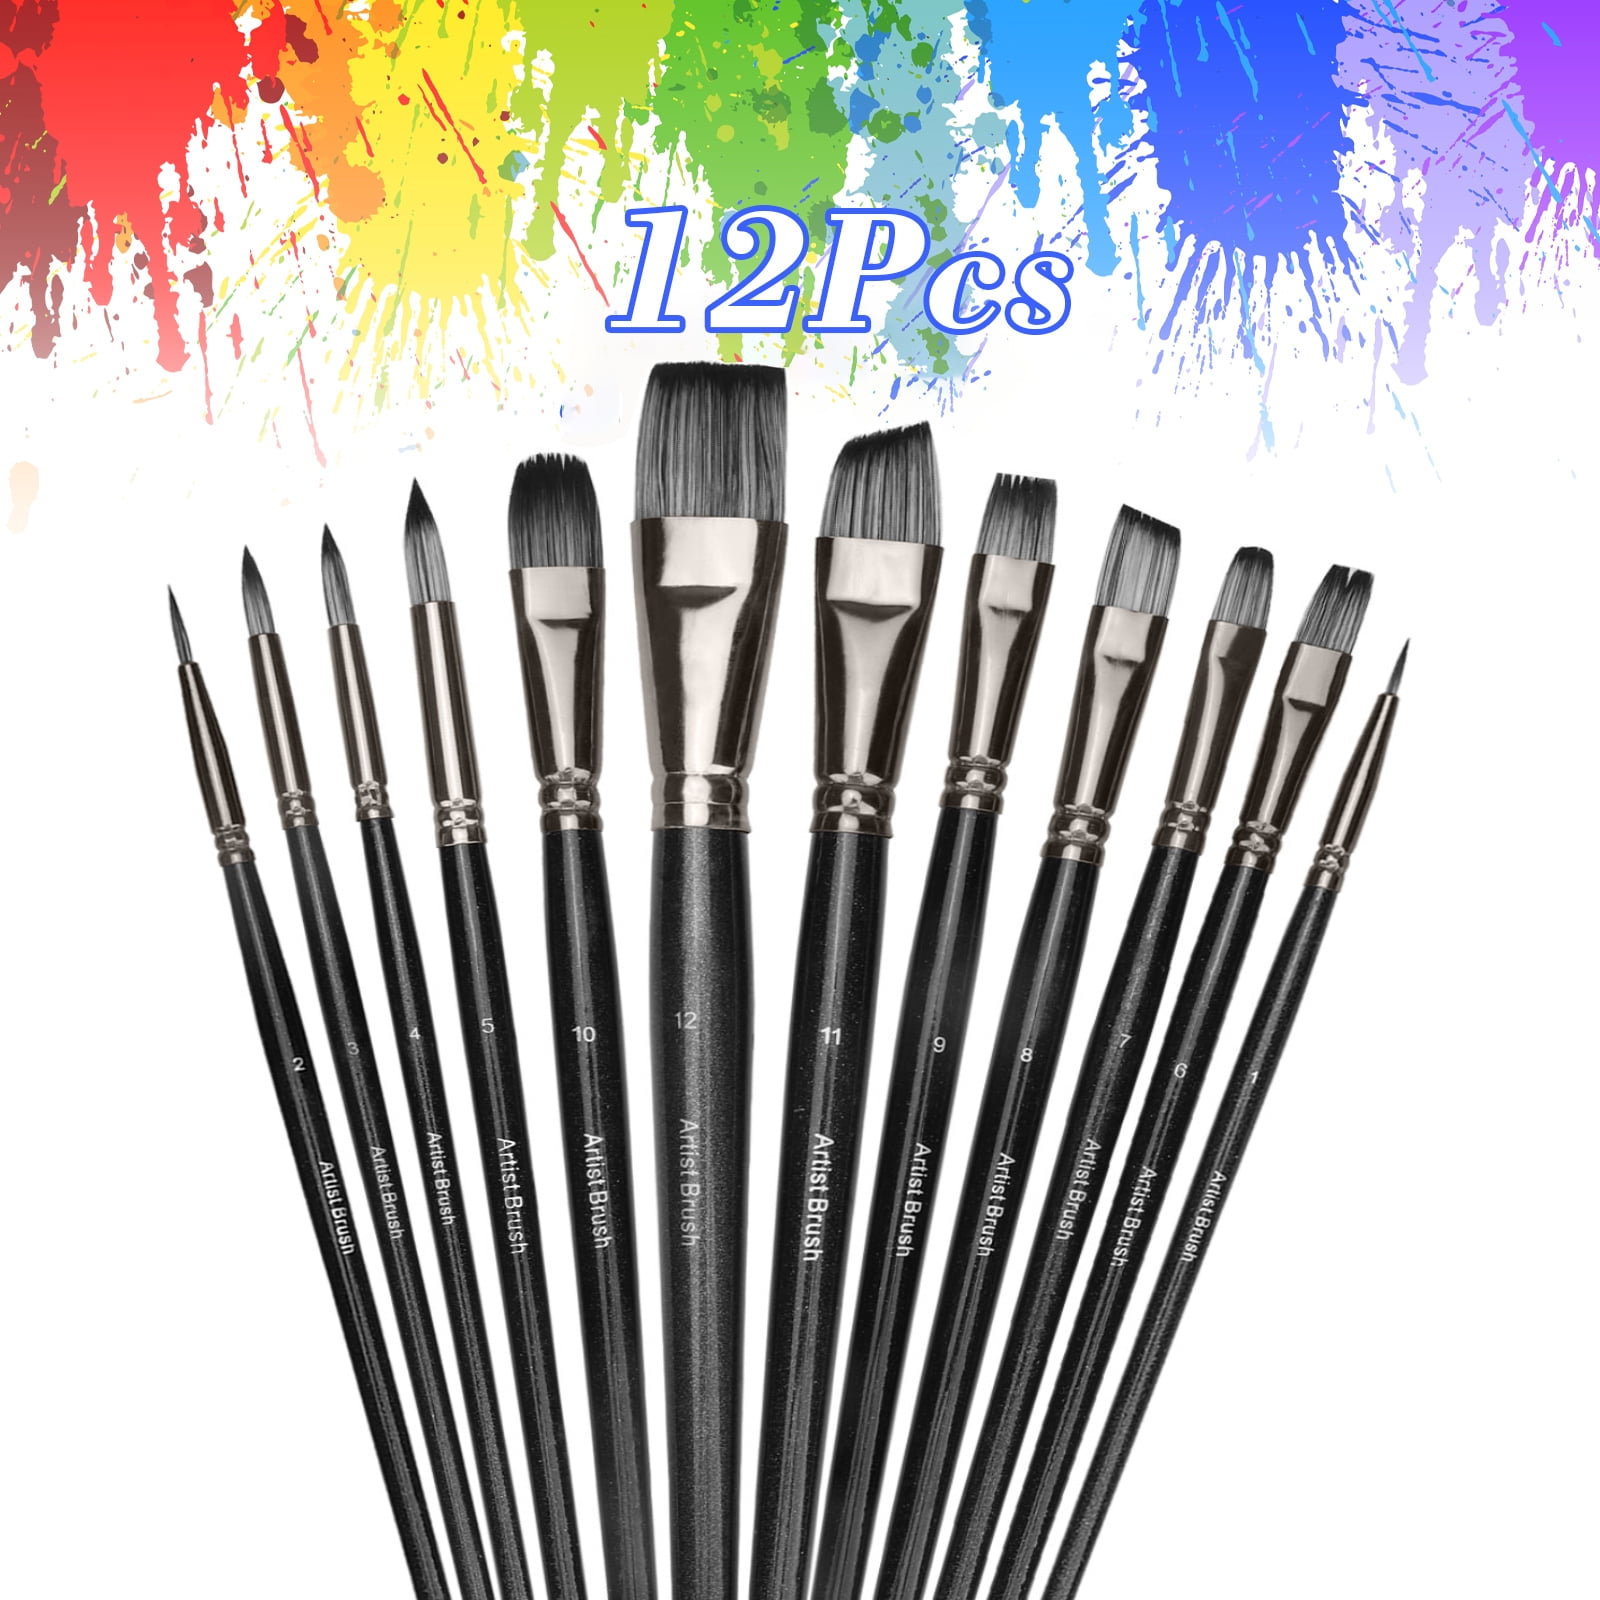 12 Artist Paint Brushes Set Acrylic Oil Watercolour Painting Craft Nail Art Tool 